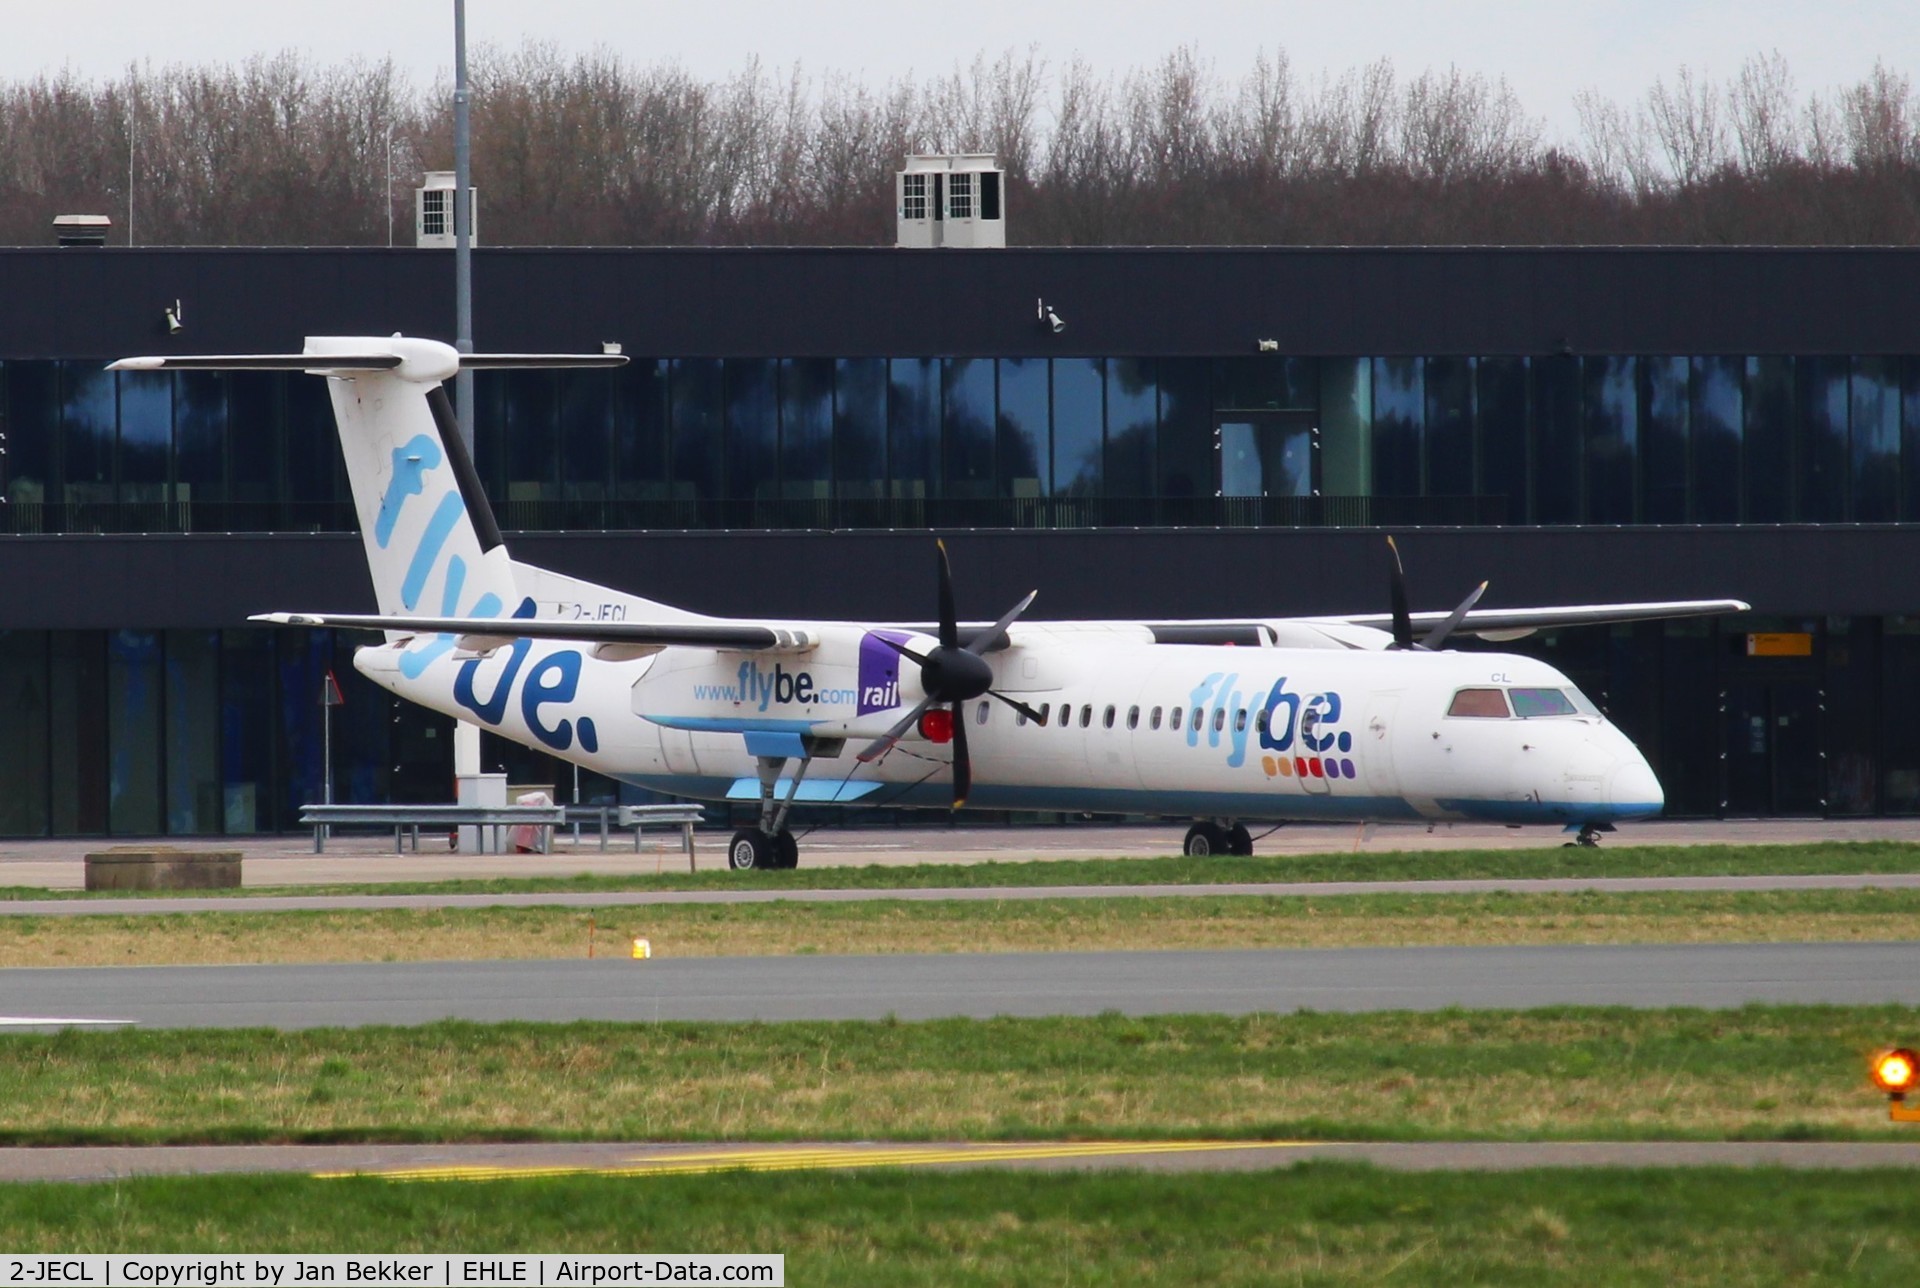 2-JECL, De Havilland Canada DHC-8-402Q Dash 8 Dash 8 C/N 4114, Lelystad Airport waiting for a new livery. Former G-JECL